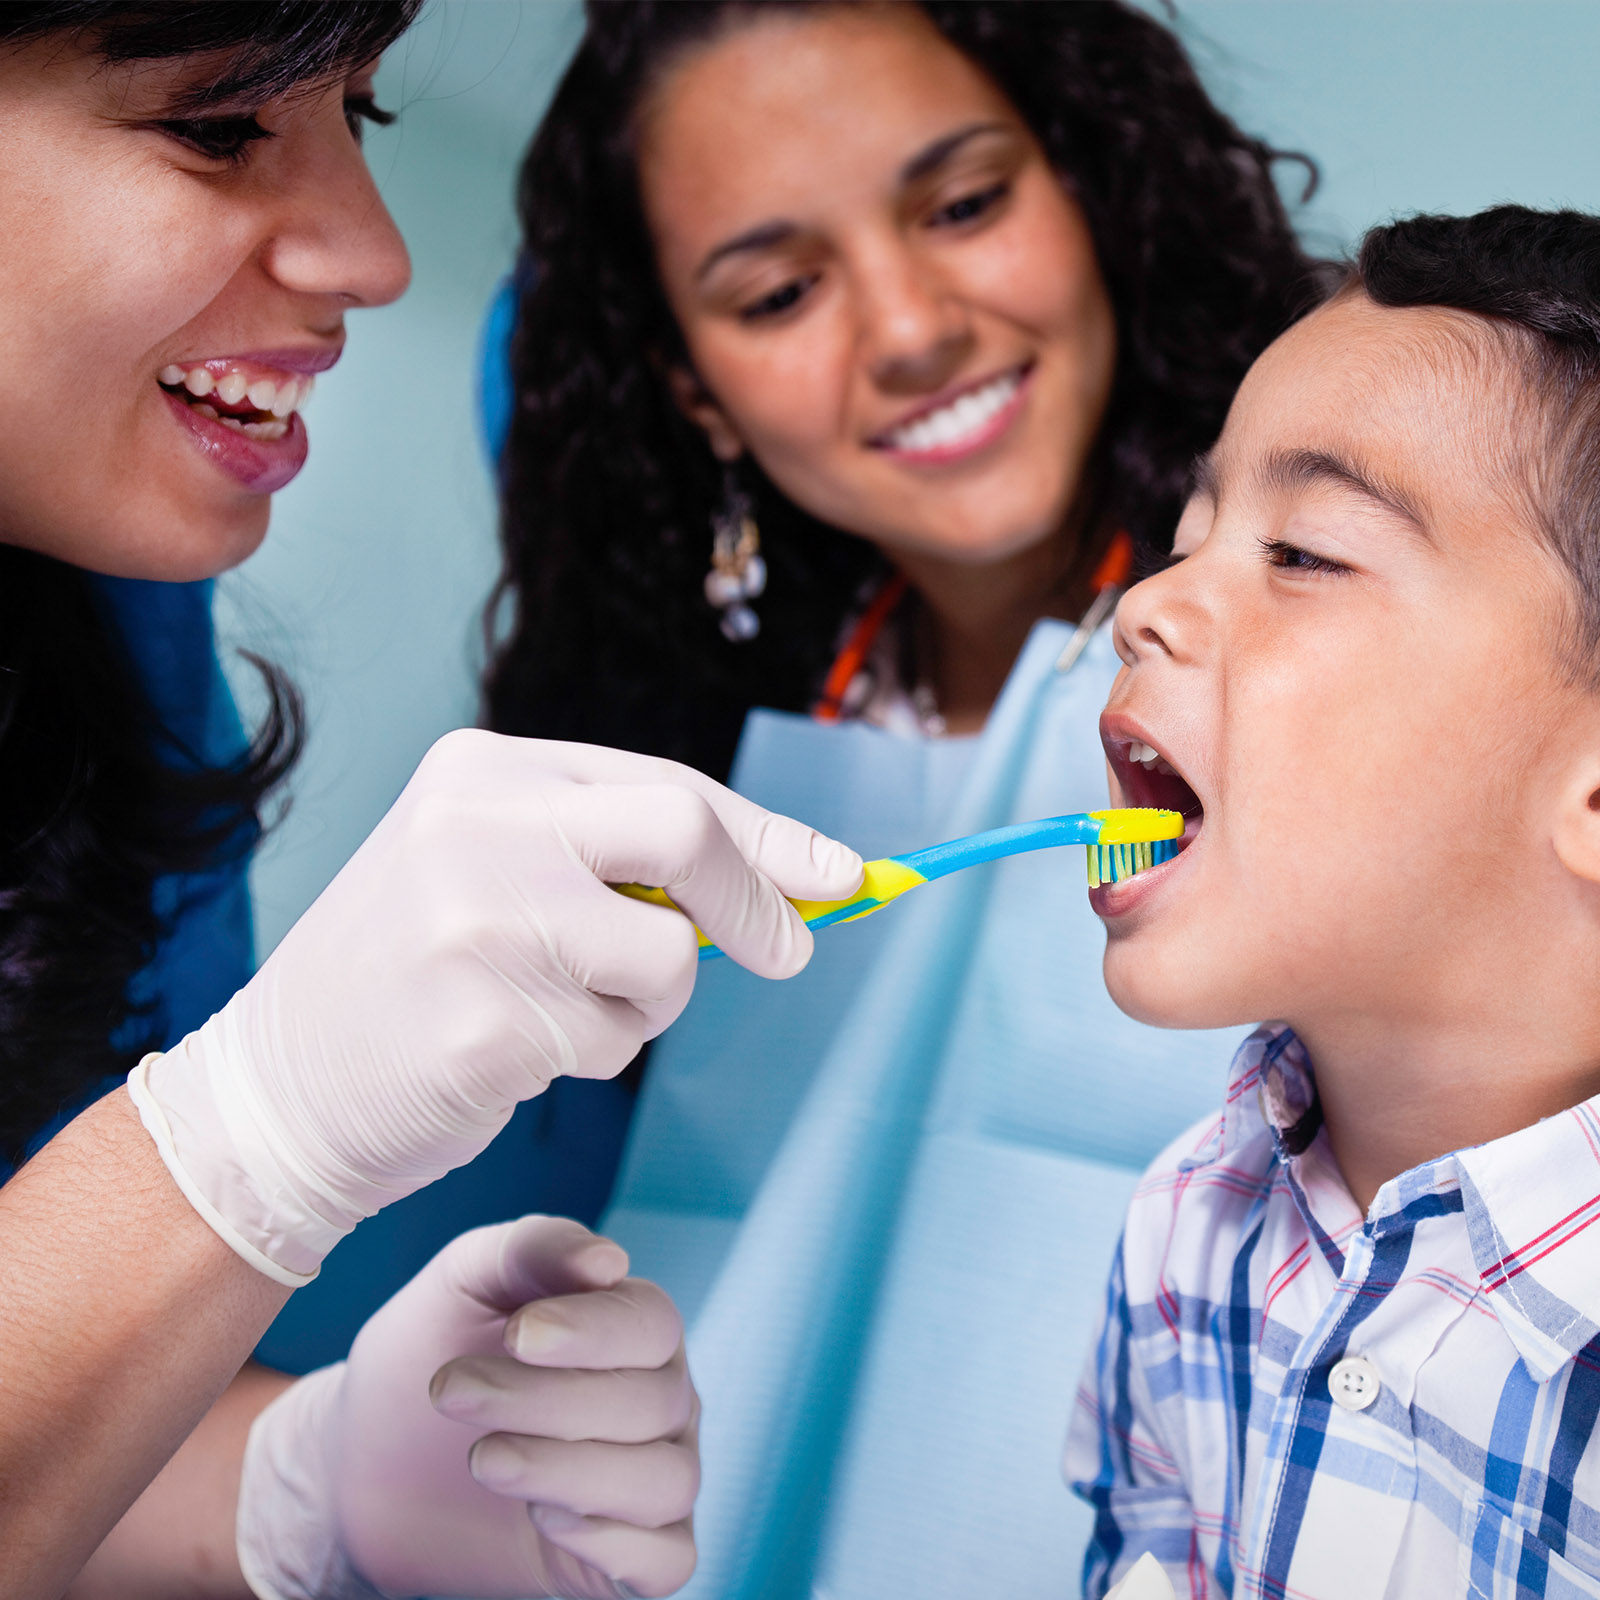 Dentist brushes boy’s teeth while mom watches